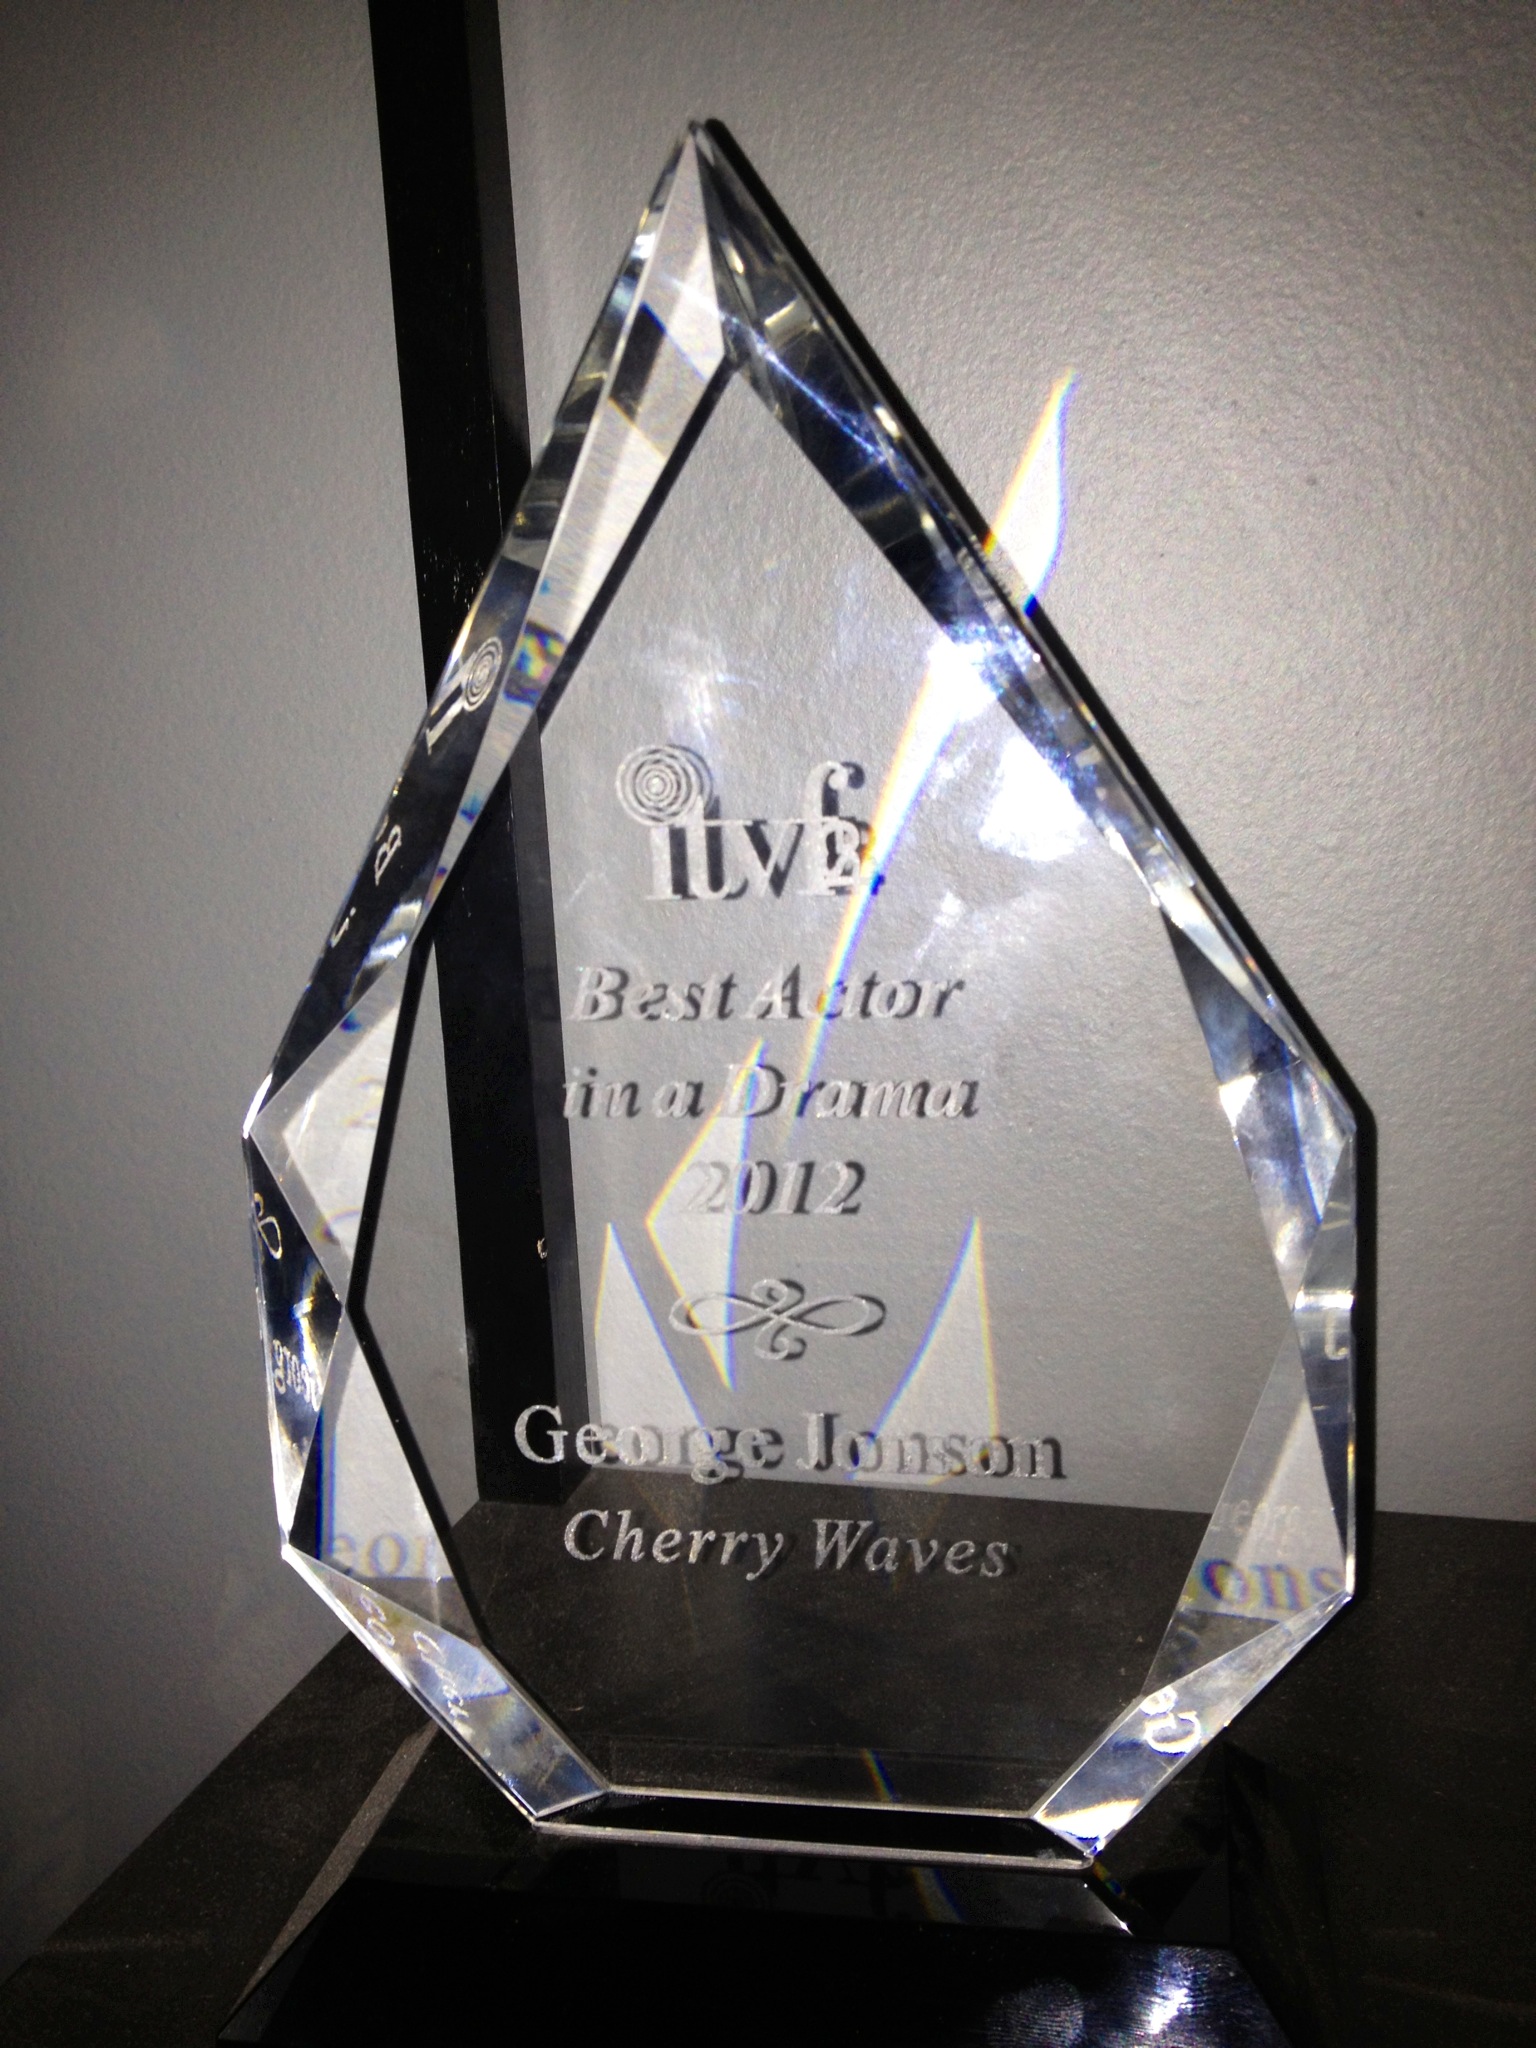 ITVFest, 2012, Best Actor in a Drama: George Jonson, 'Cherry Waves'